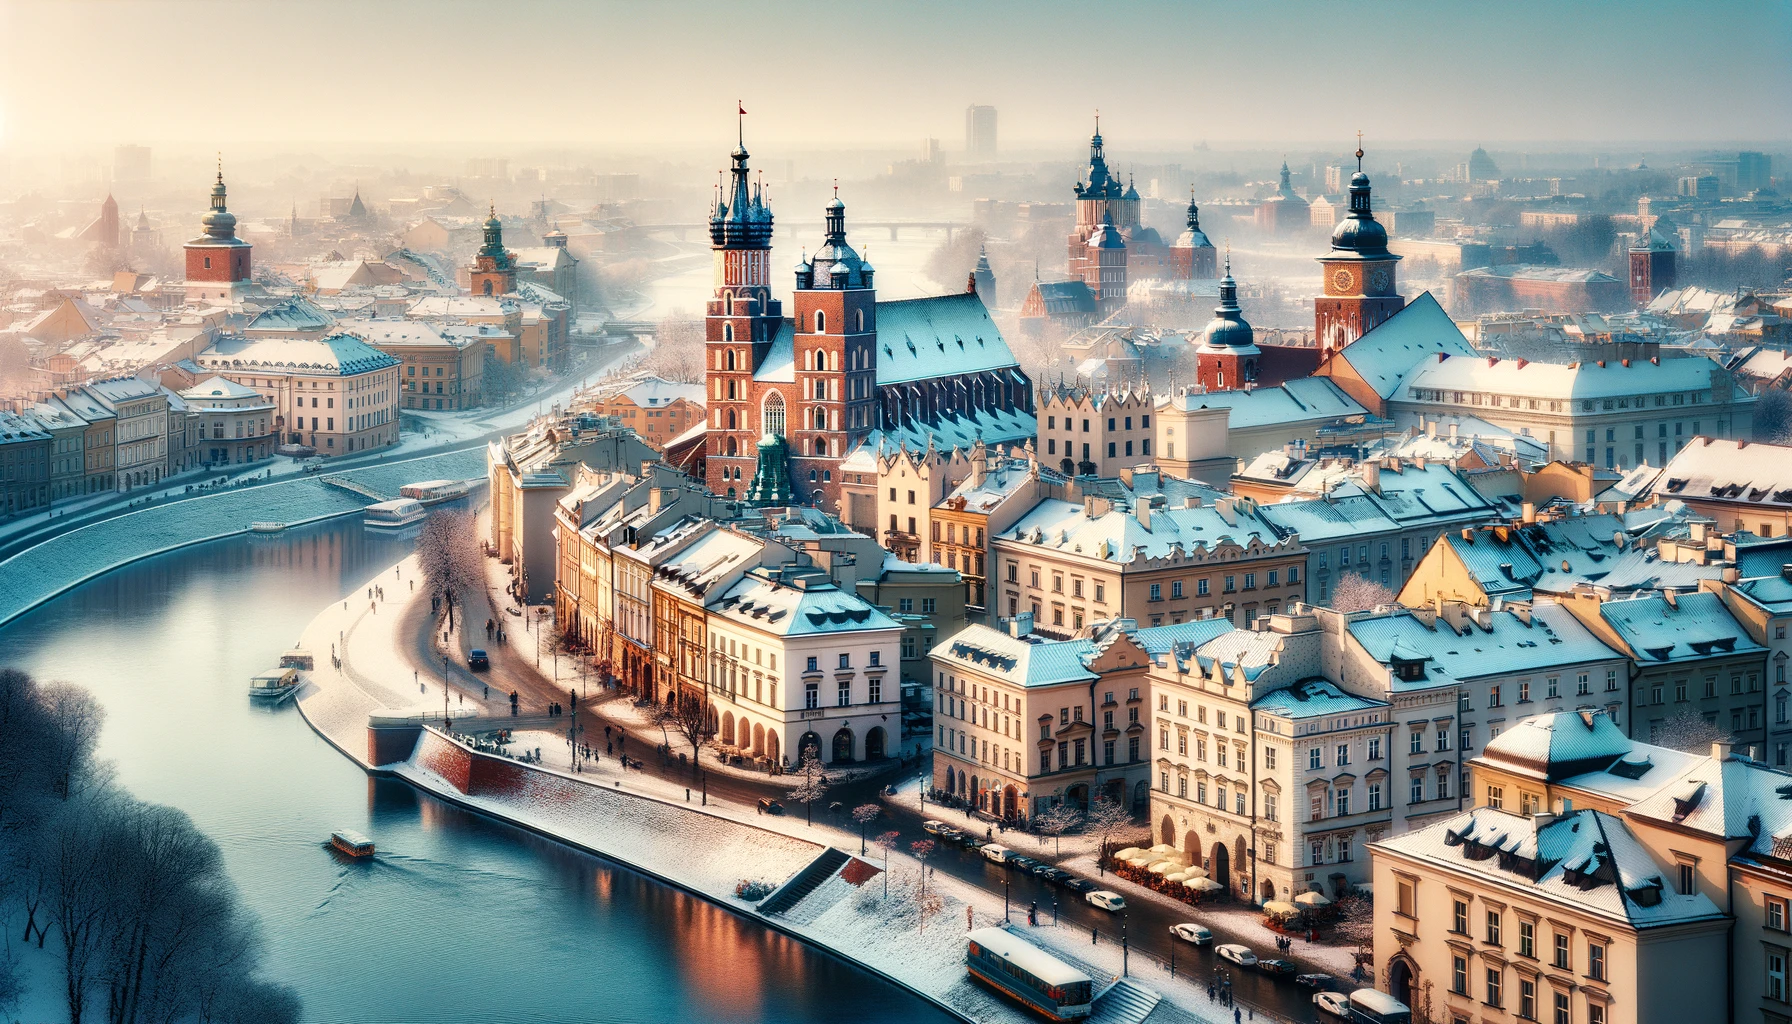 Snow-covered historic center of Krakow with Gothic and Renaissance architecture